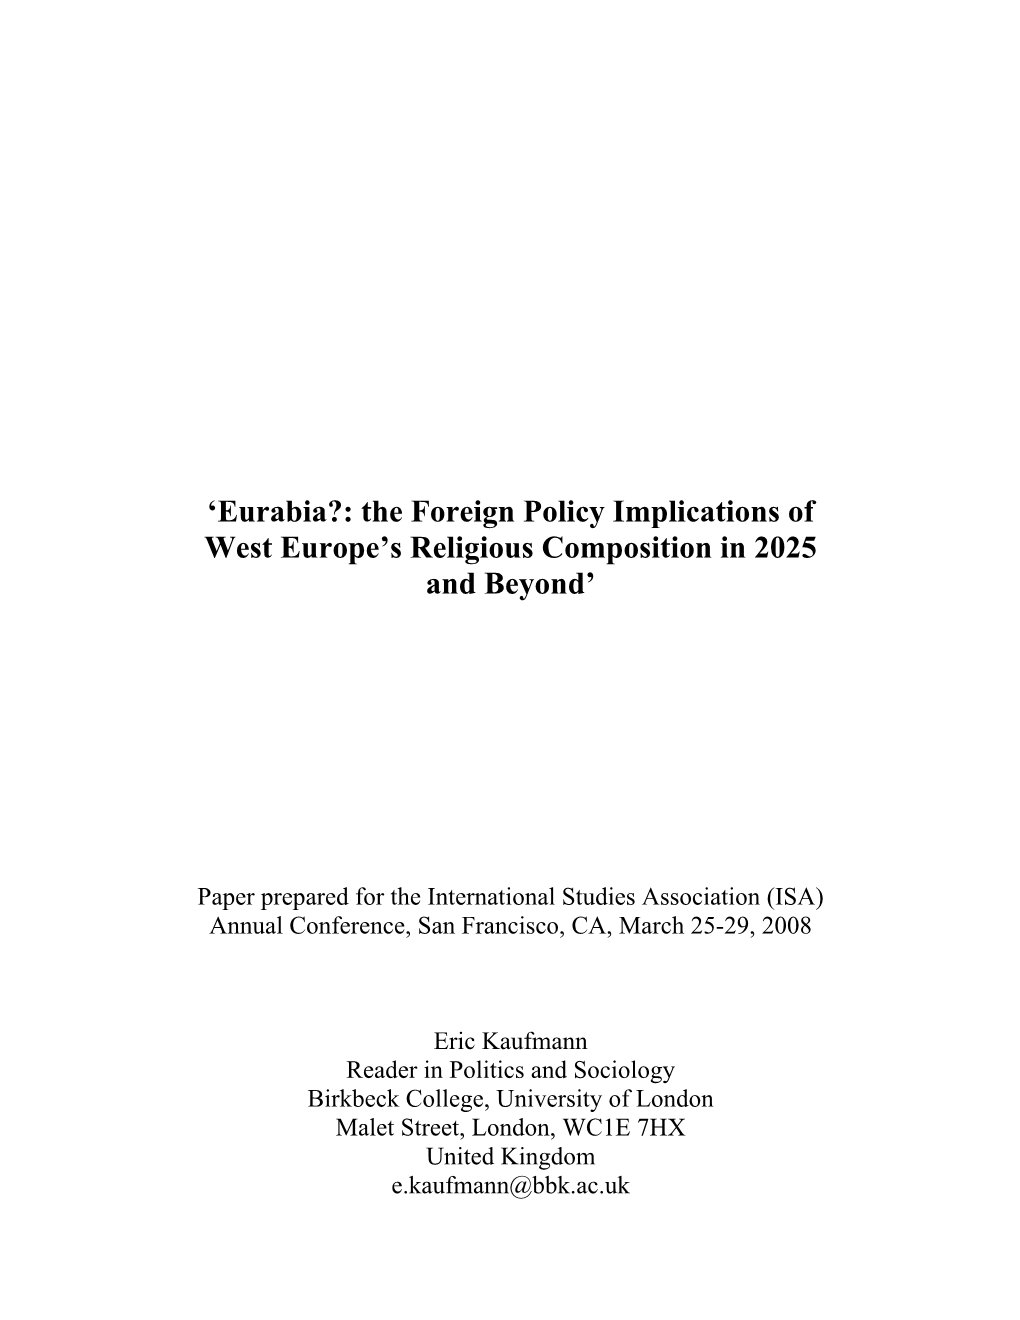 'Eurabia?: the Foreign Policy Implications of West Europe's